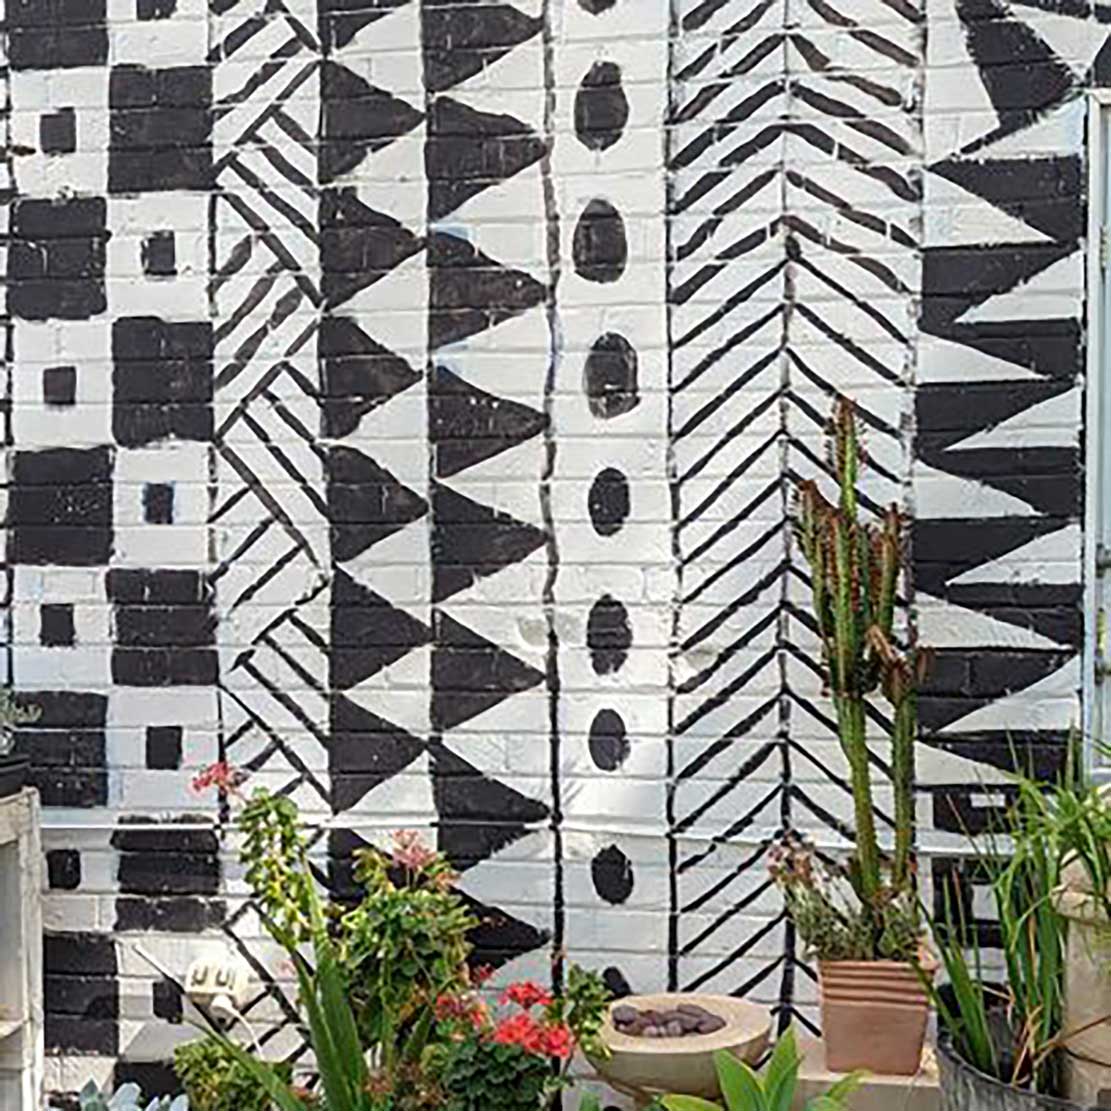 a mural on a wall at the art garden painted in simple black and white patterns